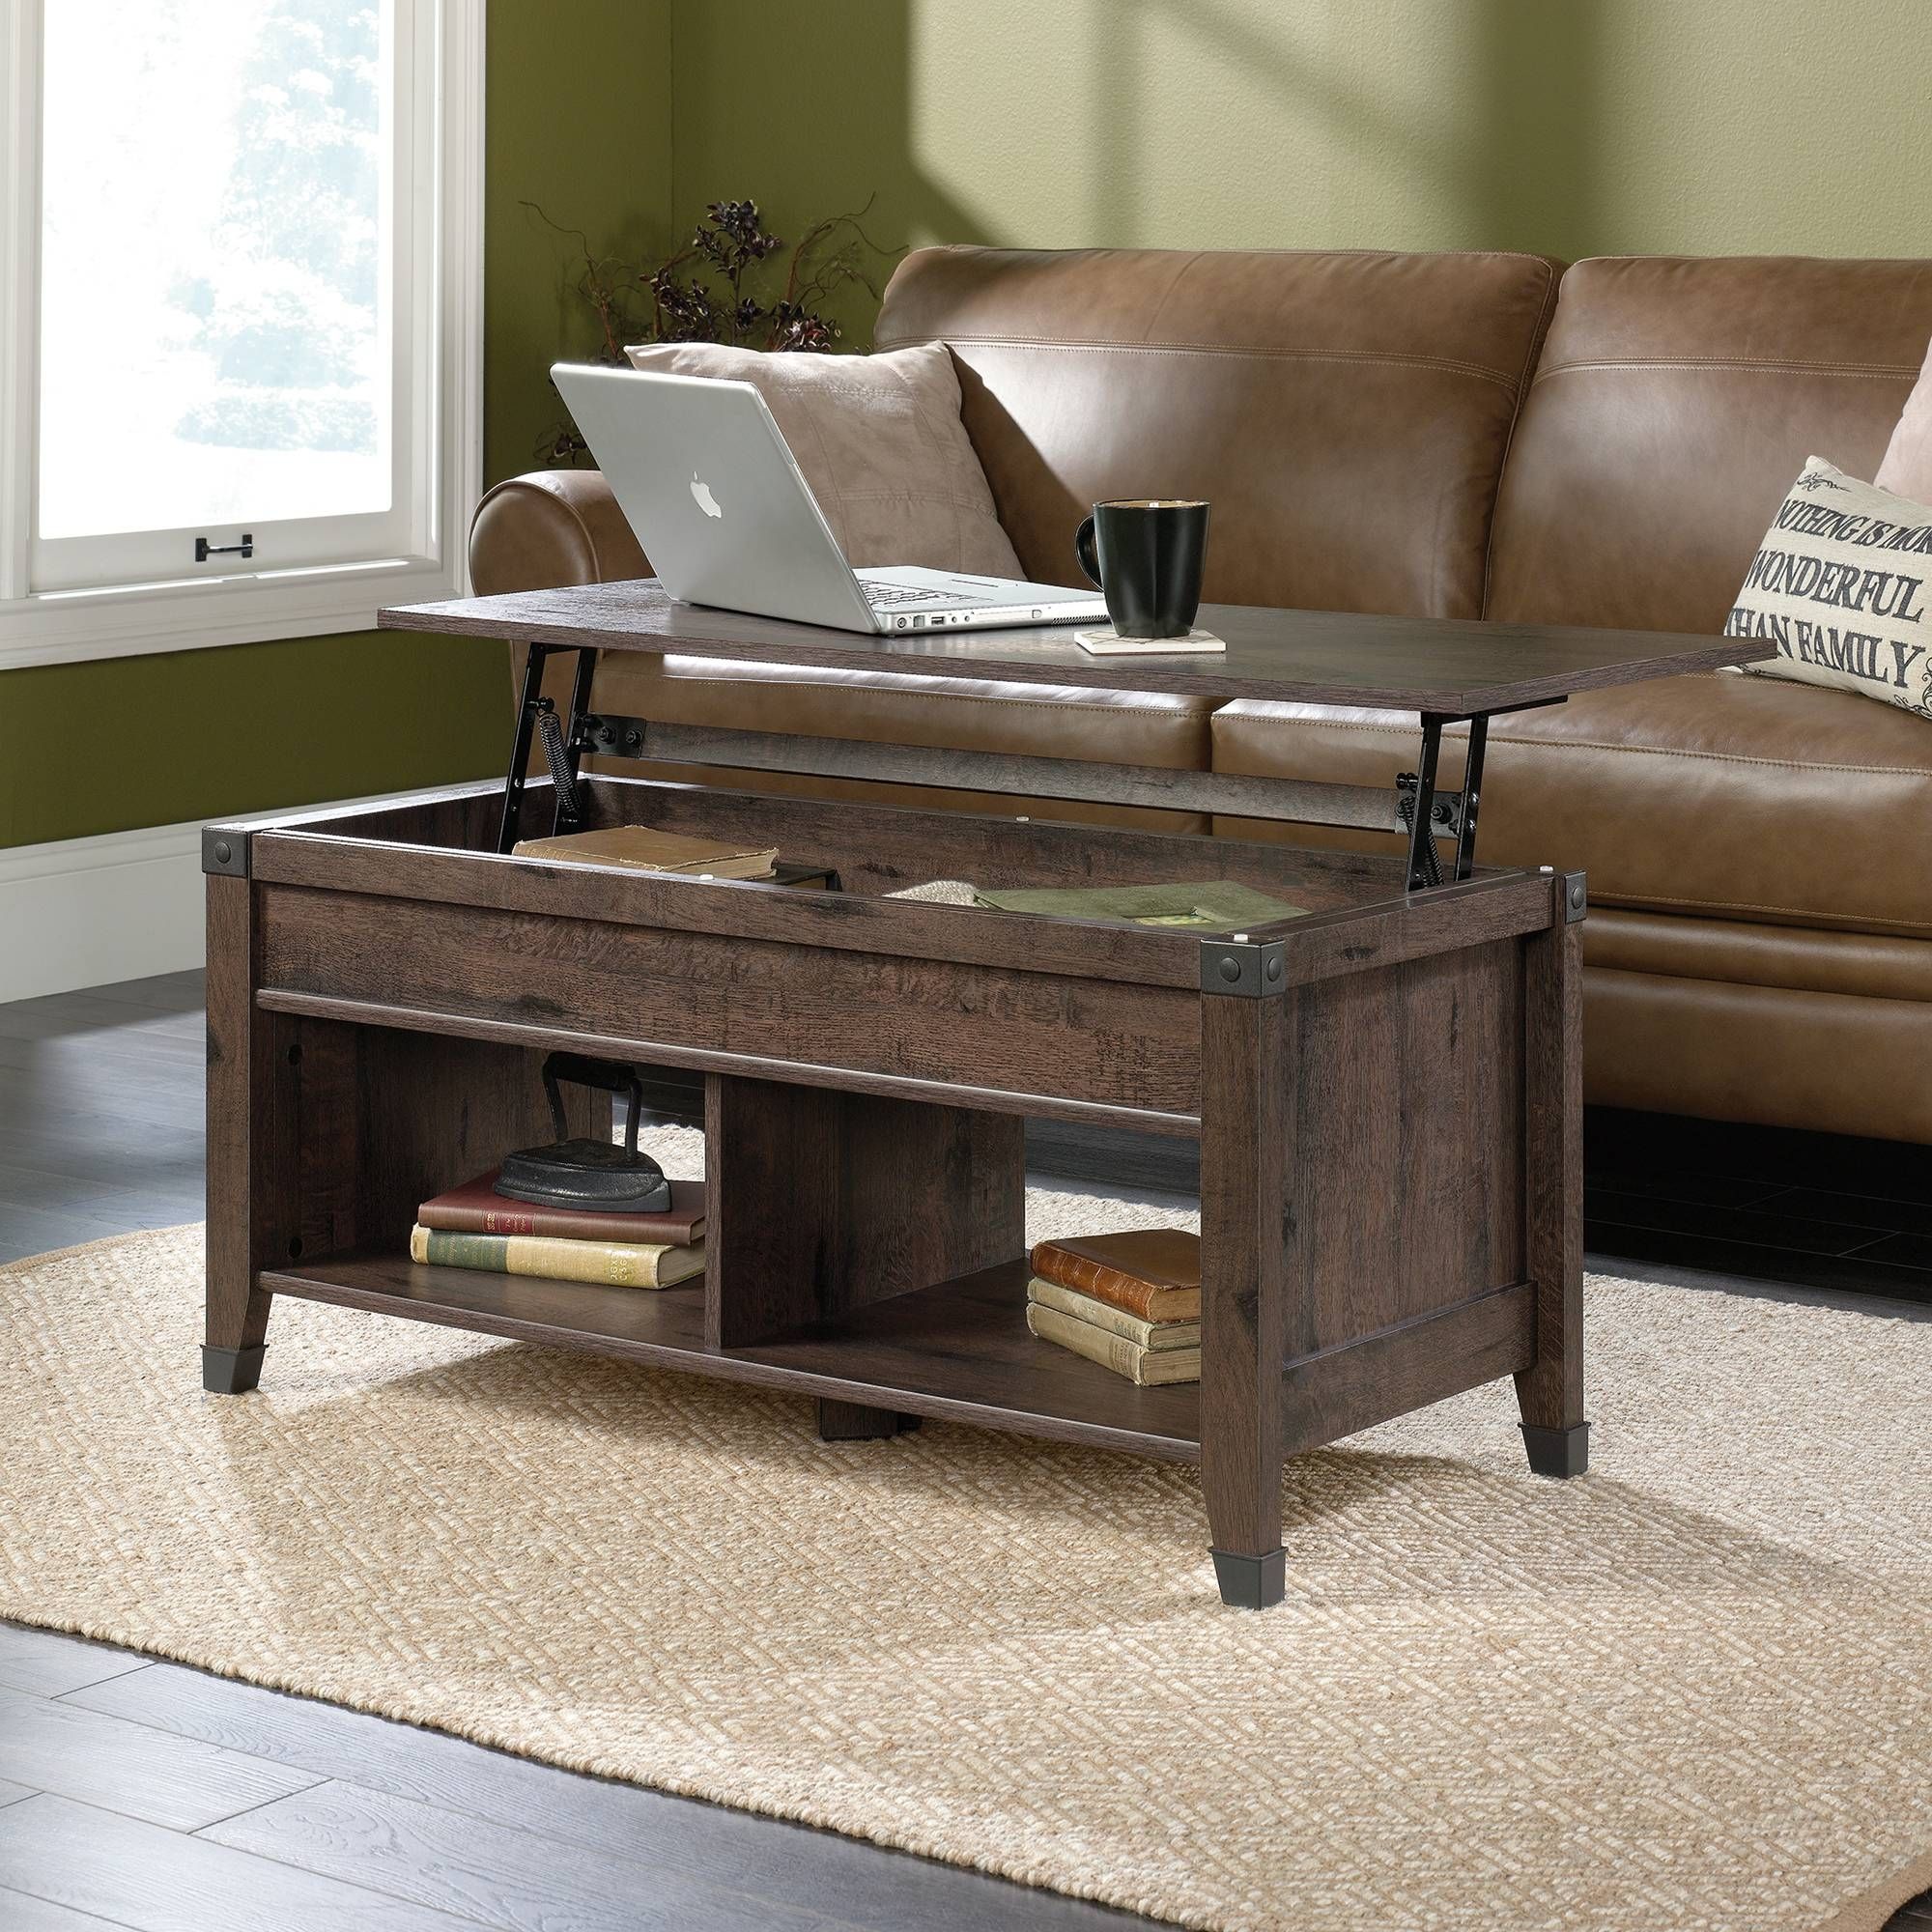 Carson Forge | Lift Top Coffee Table | 420421 | Sauder With Lift Up Coffee Tables (View 21 of 30)